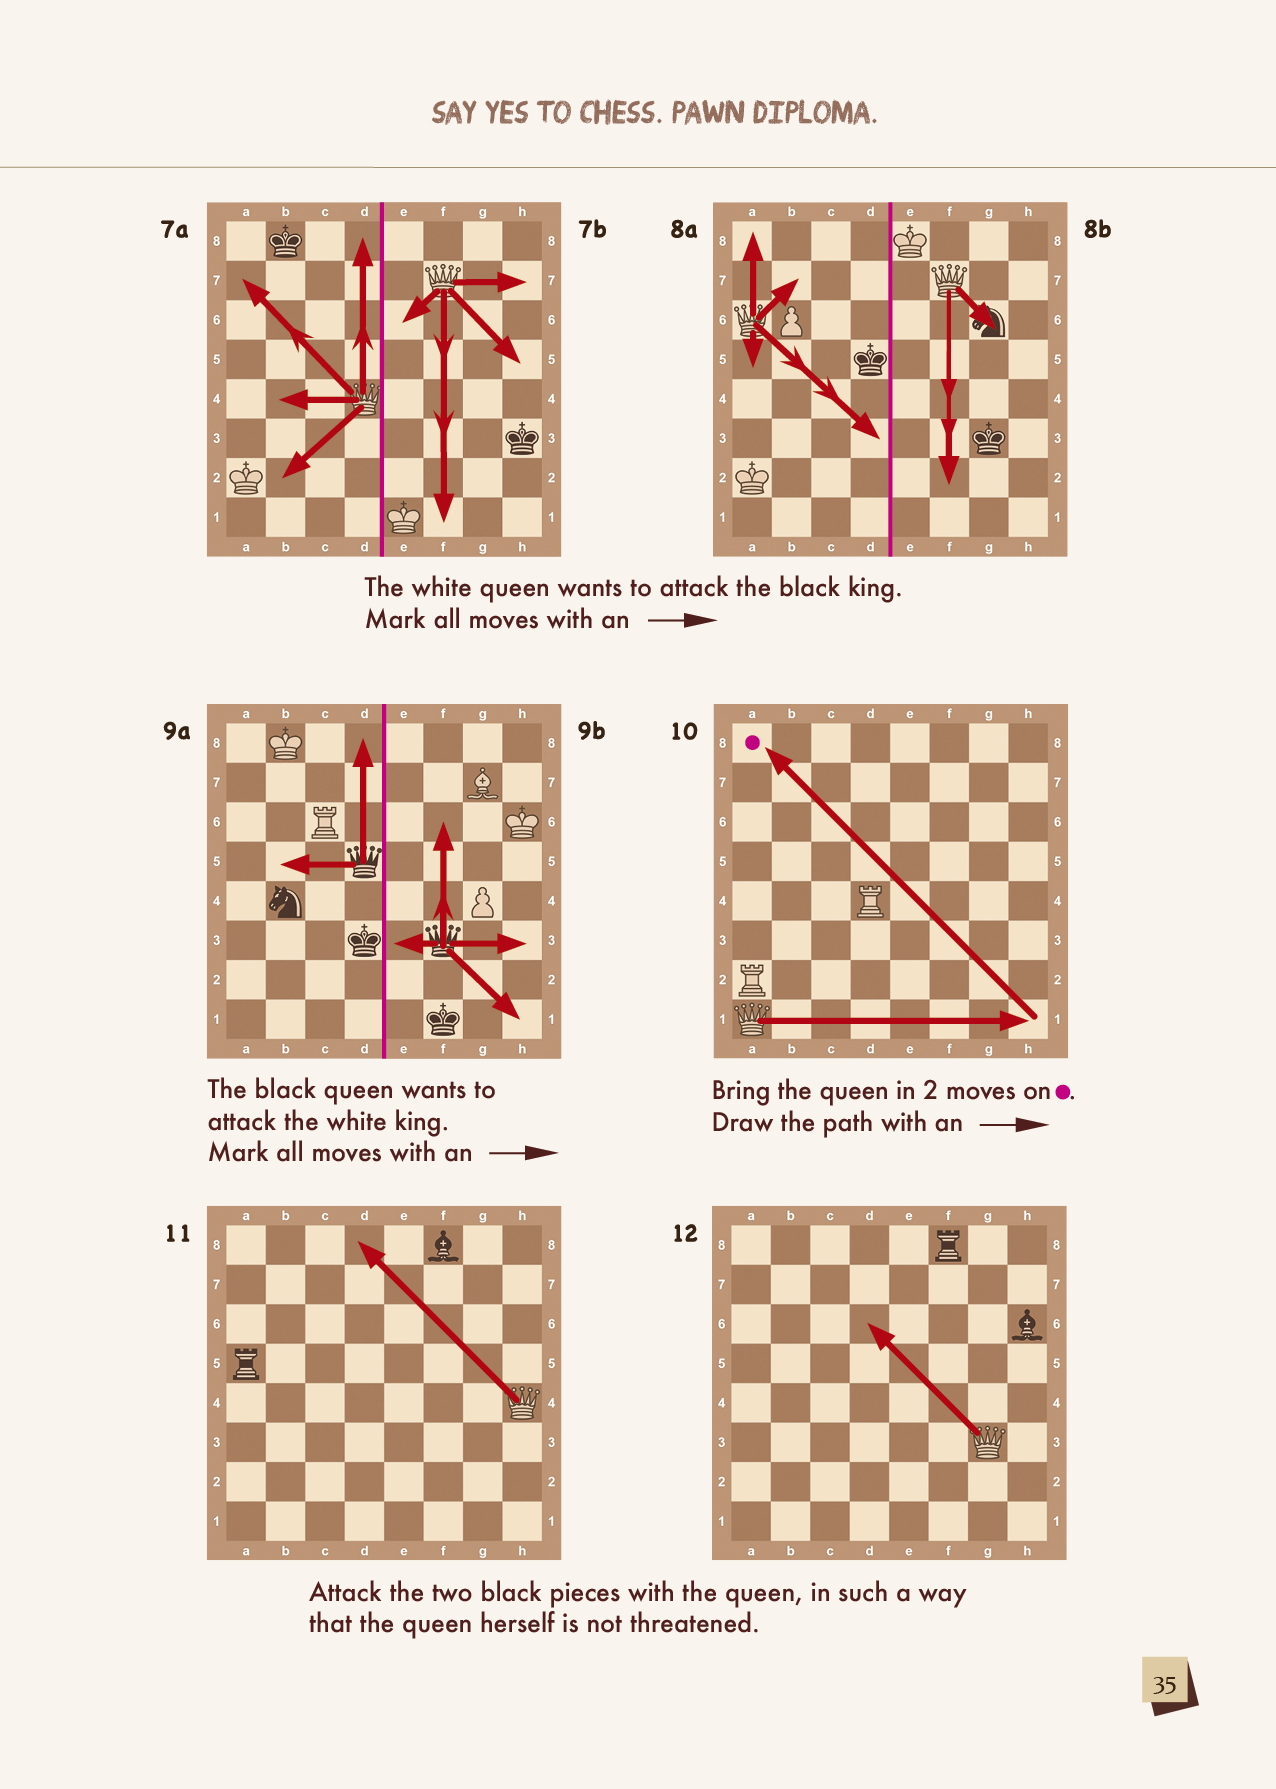 sayyes2chess_solutions_page_35.jpg